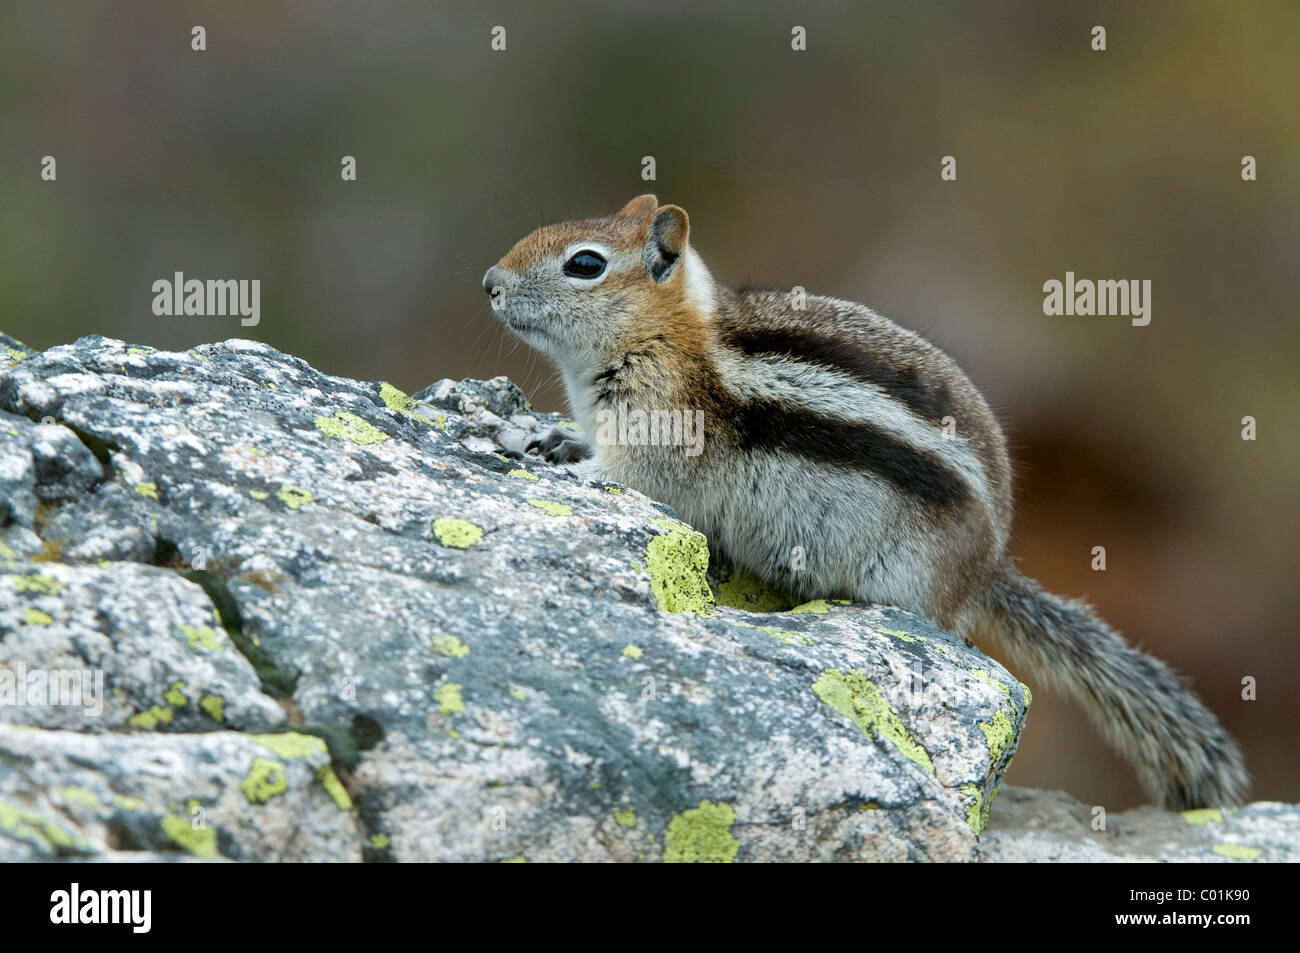 Golden-mantled ground squirrel (Spermophilus lateralis), Grand Teton National Park, Wyoming, USA, North America Stock Photo